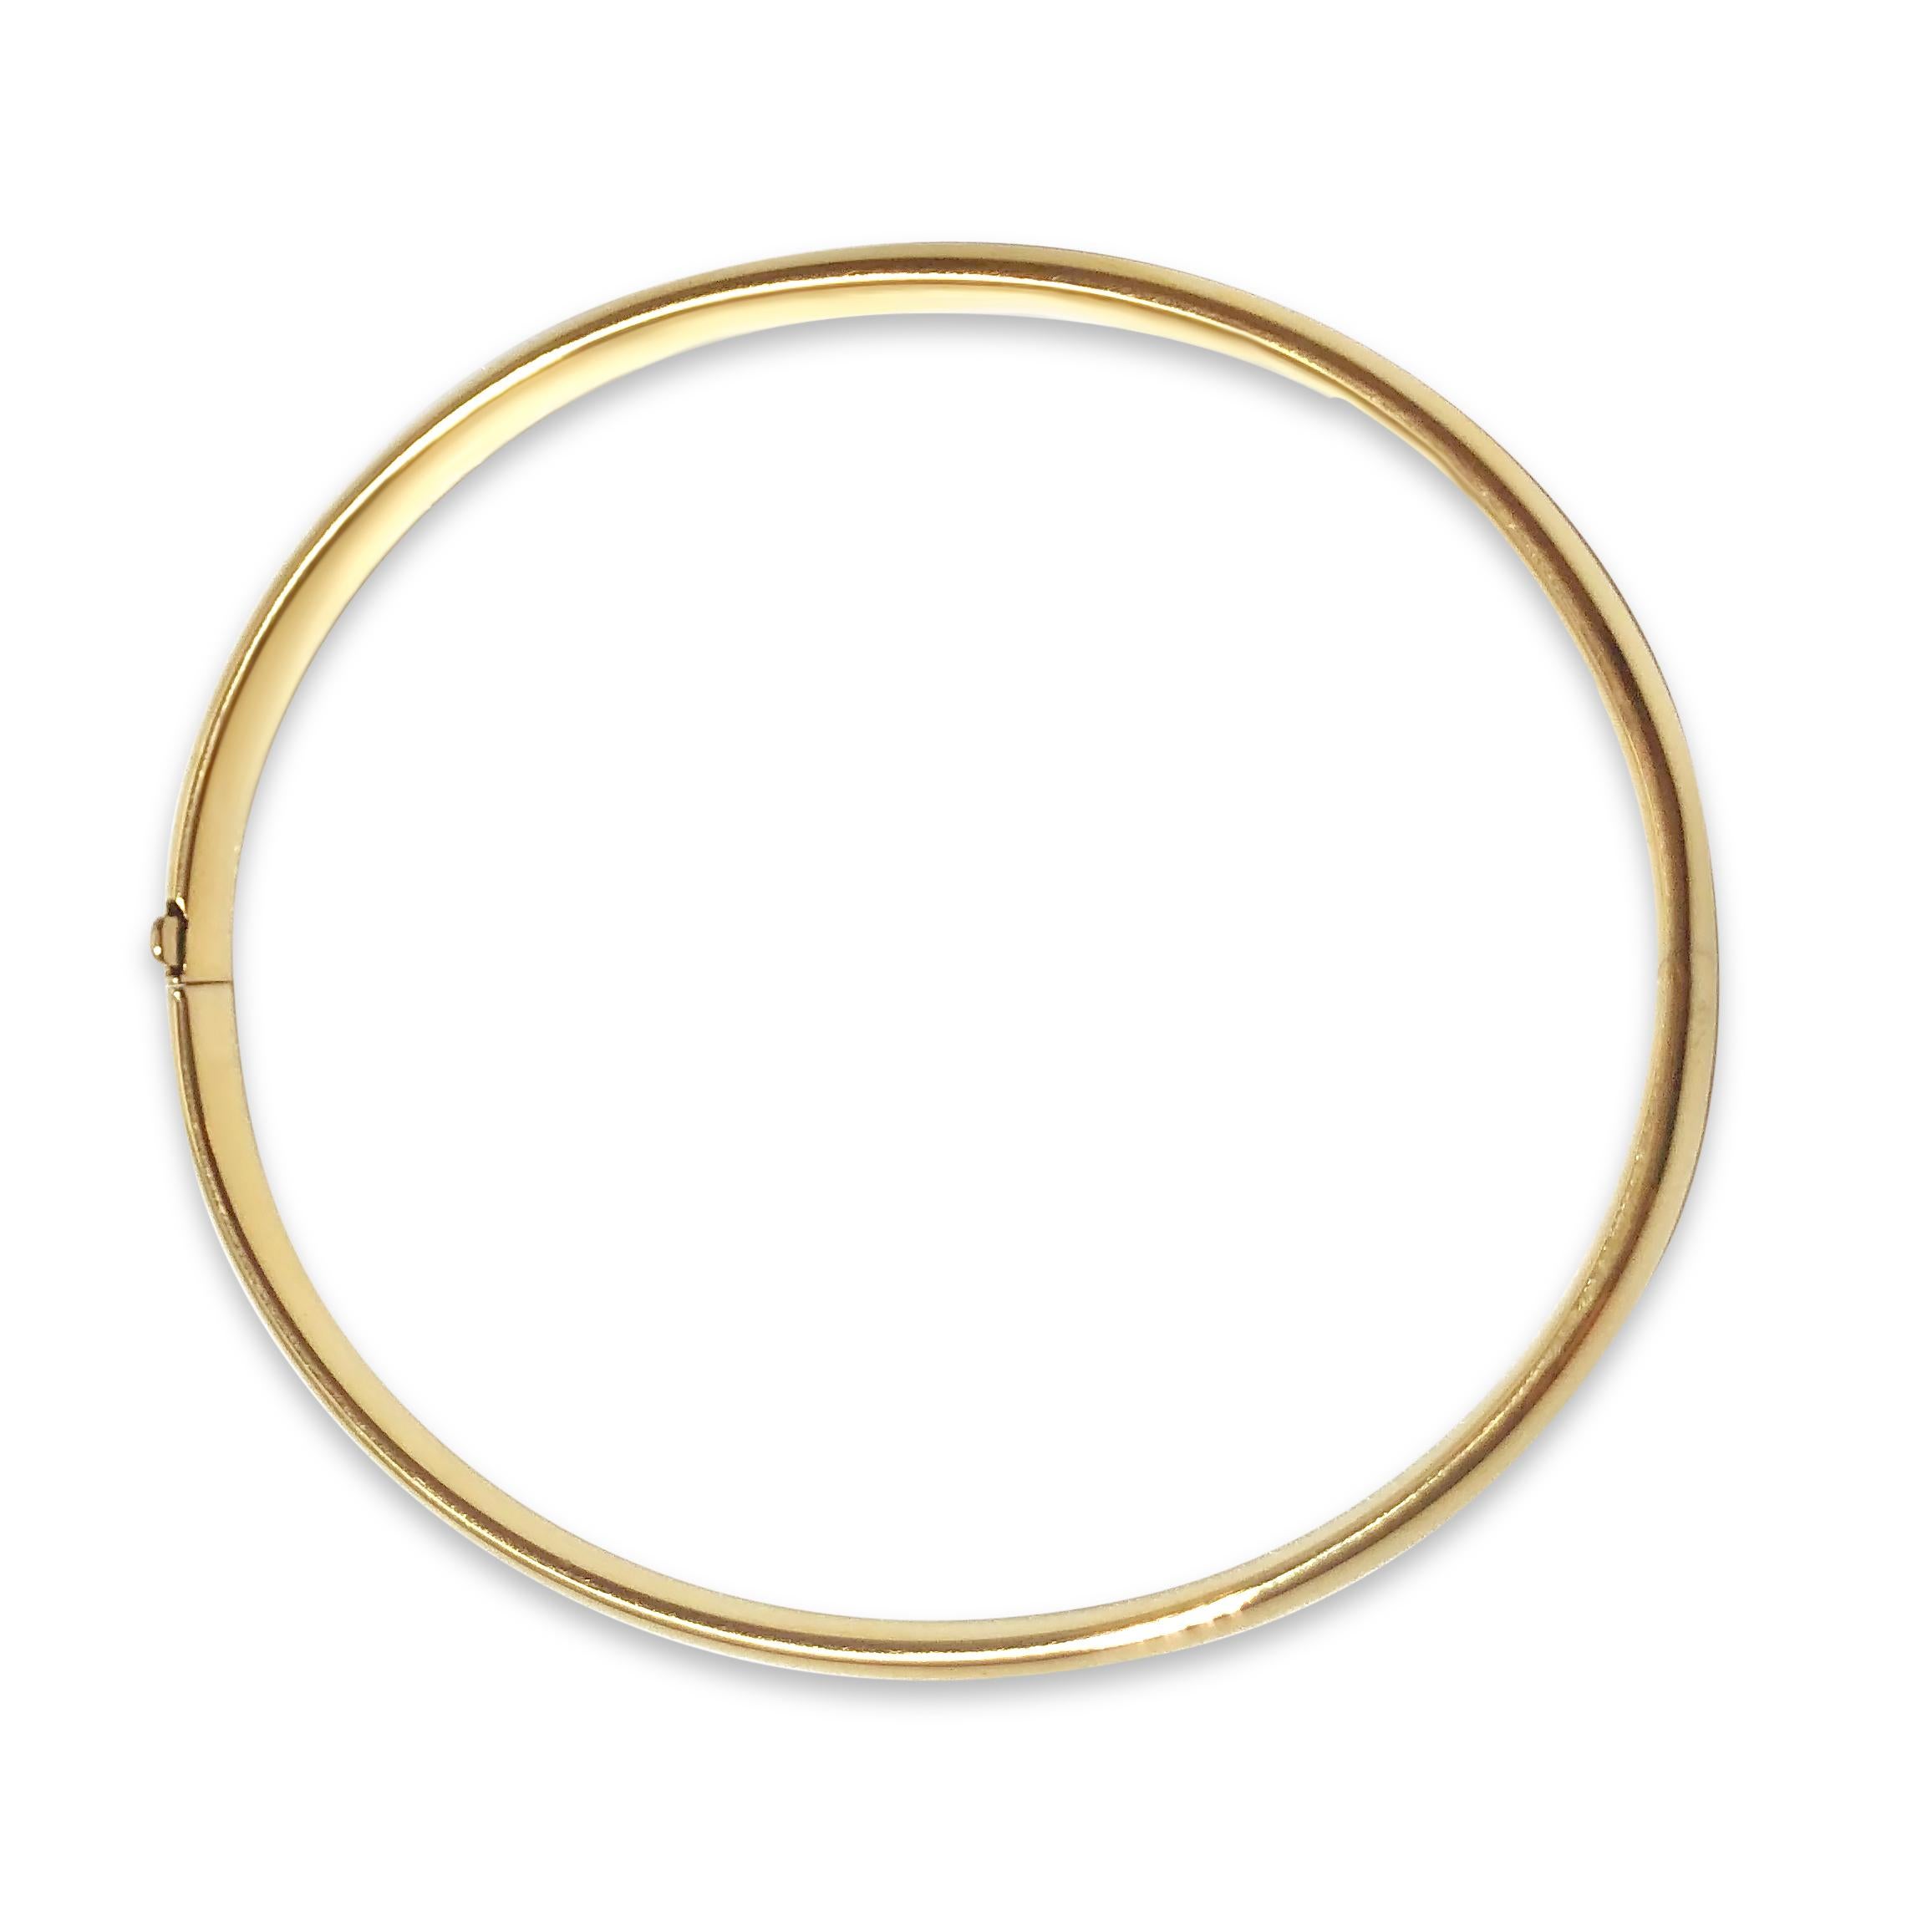 A perfectly classic gold bangle. Our ‘Dome Bright’ 18K yellow gold oval-shaped bracelet is 3/16 inches in width and securely closes with a snap & hinge.

Specifications:
- Shape: Oval
- Dimension: 6 5/8